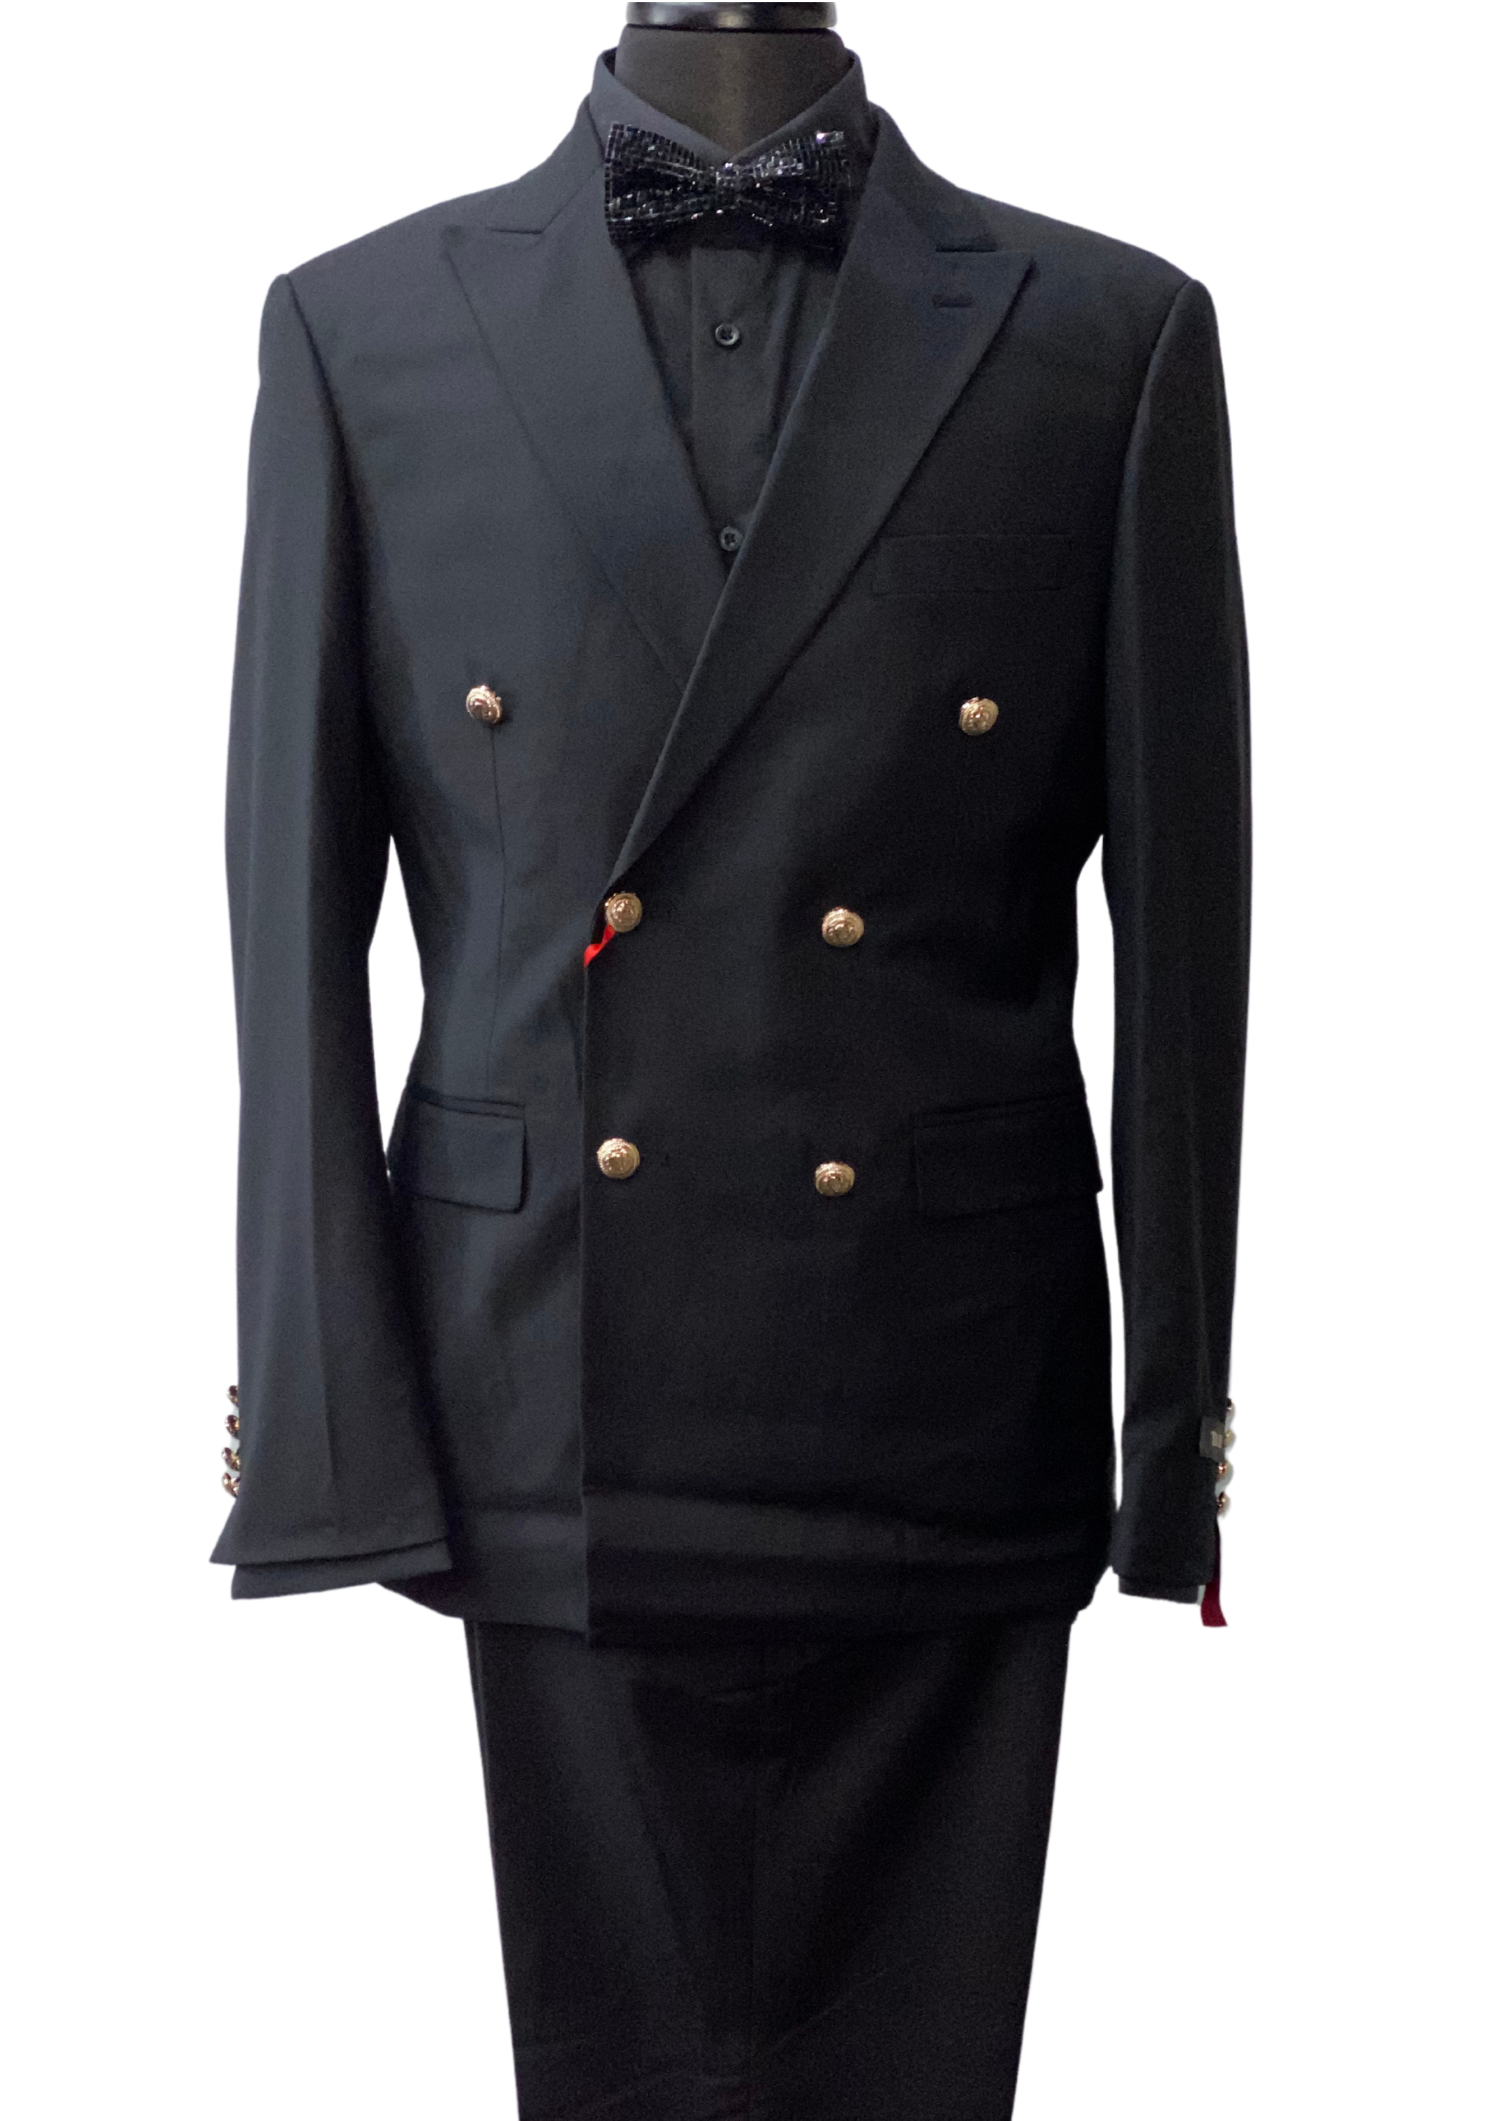 Tazzio Double Breasted Black & Gold Button Suit